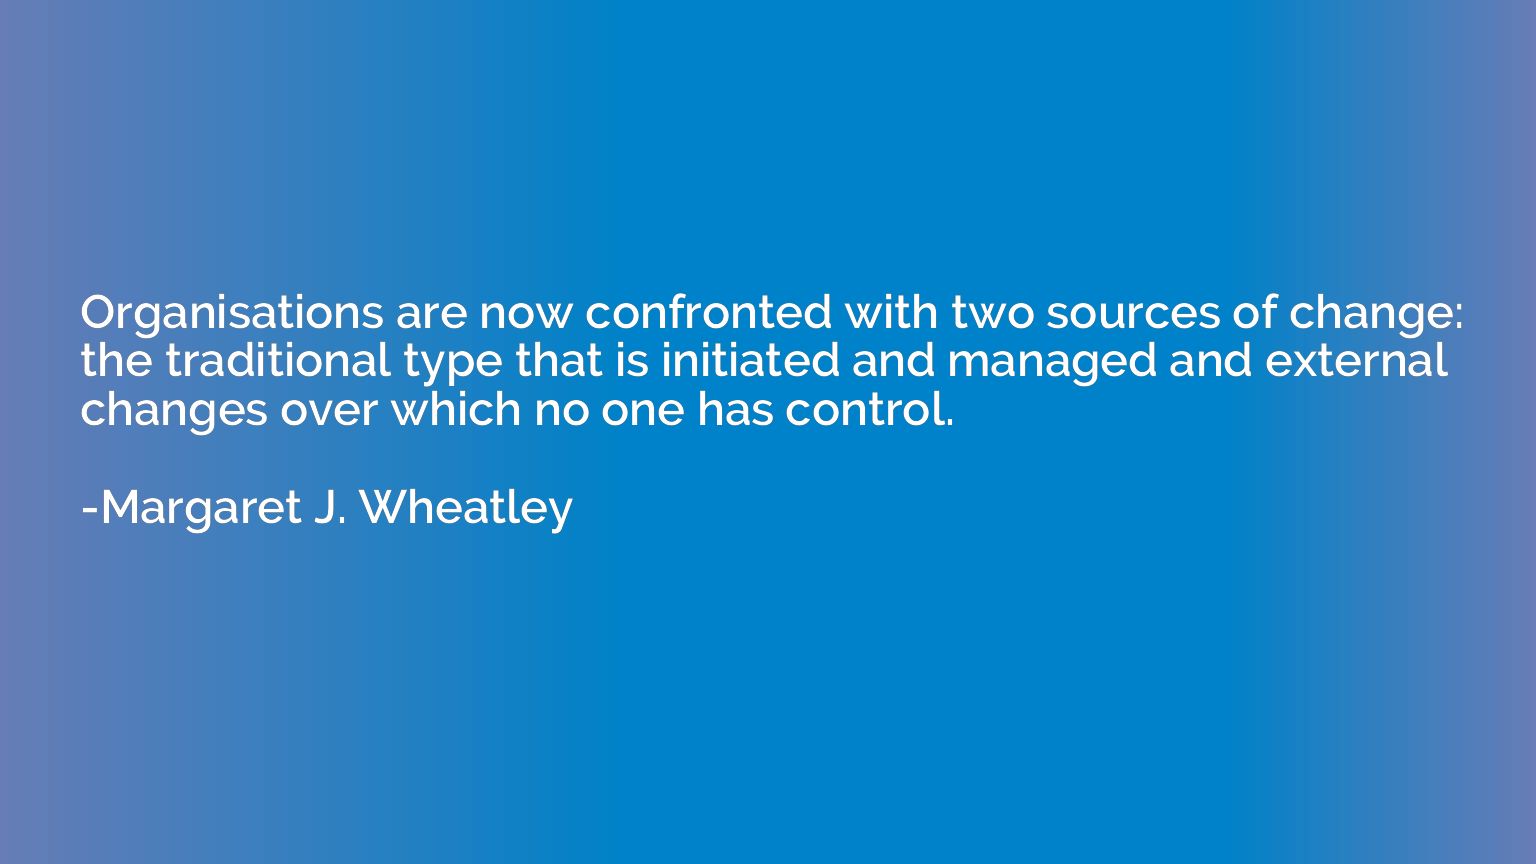 Organisations are now confronted with two sources of change: